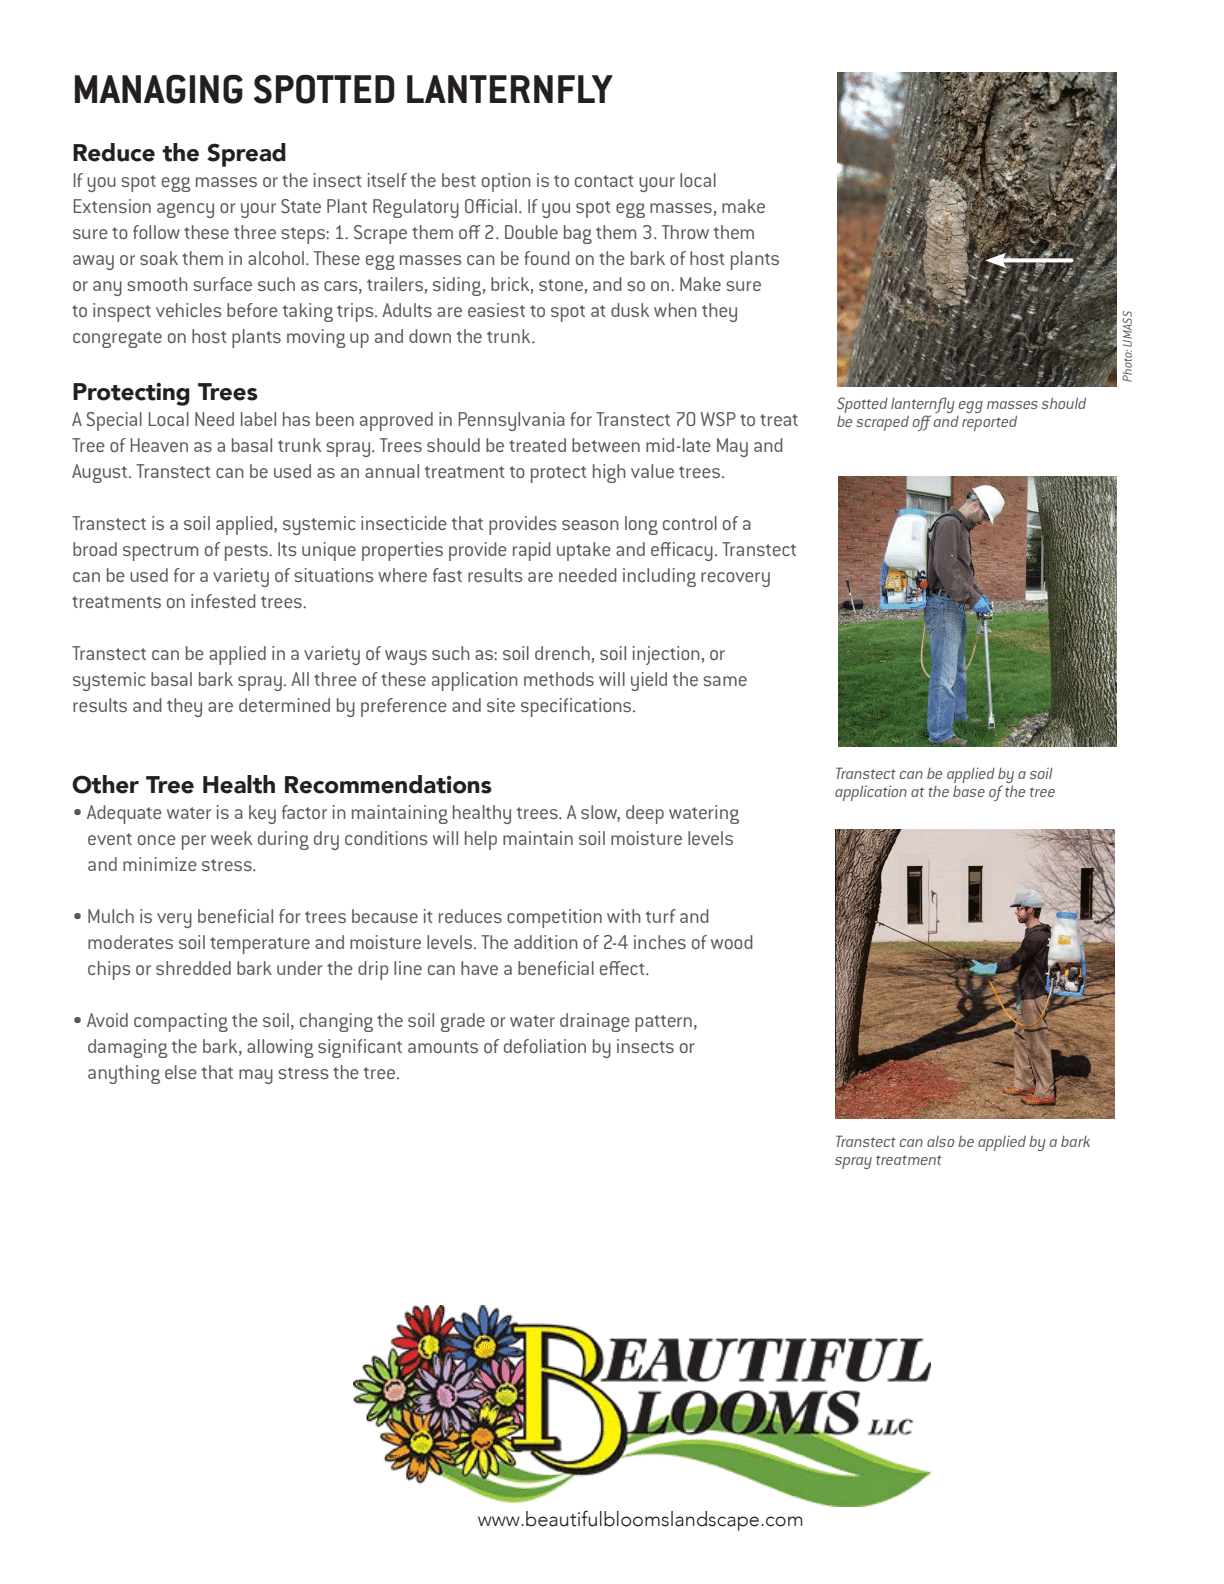 The image is an informational flyer on managing spotted lanternfly with a person applying treatment to a tree. It contains text, images, and a company logo.